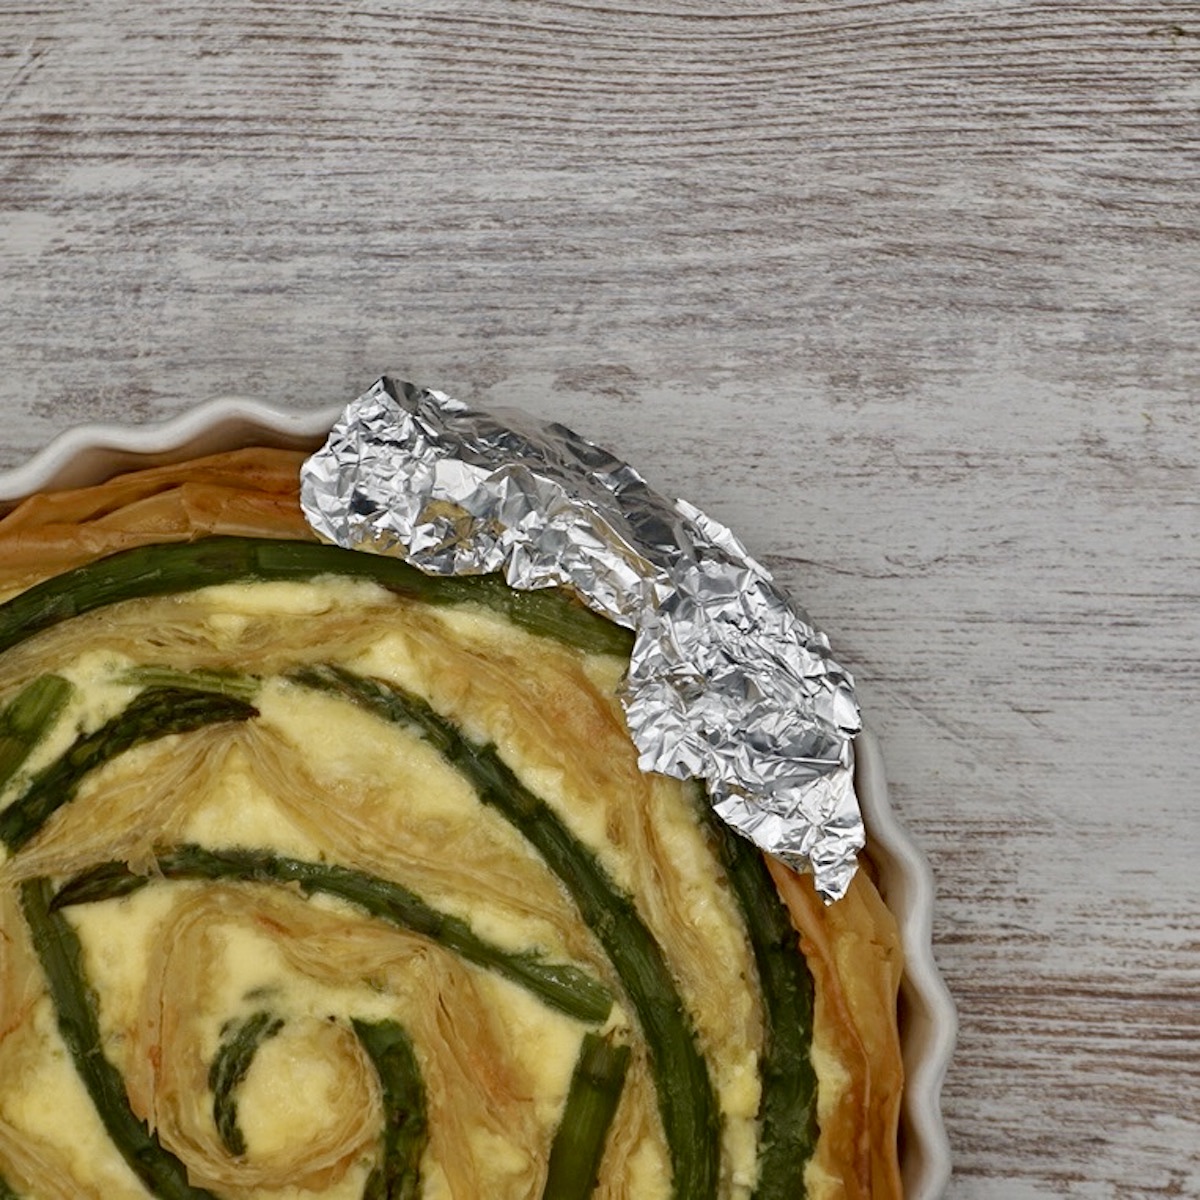 Part of a quiche with foil on part of the pastry.